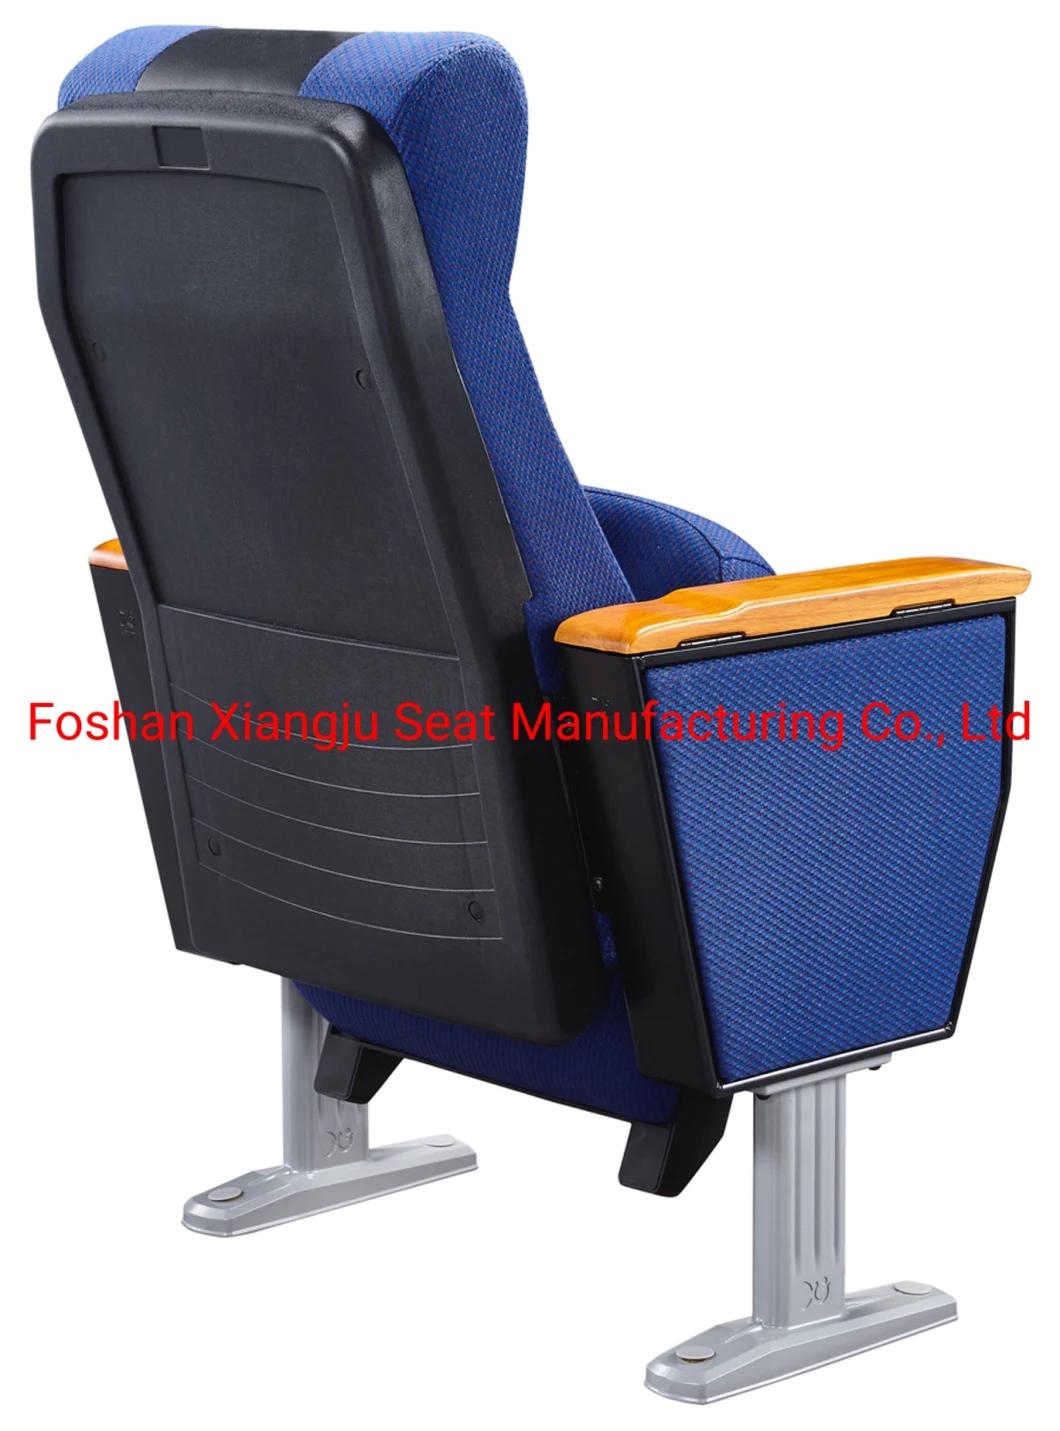 Concert Assembly Hall Foldable Church Used Auditorium Chairs Wooden Armrest, Fabric Auditorium Seating Price